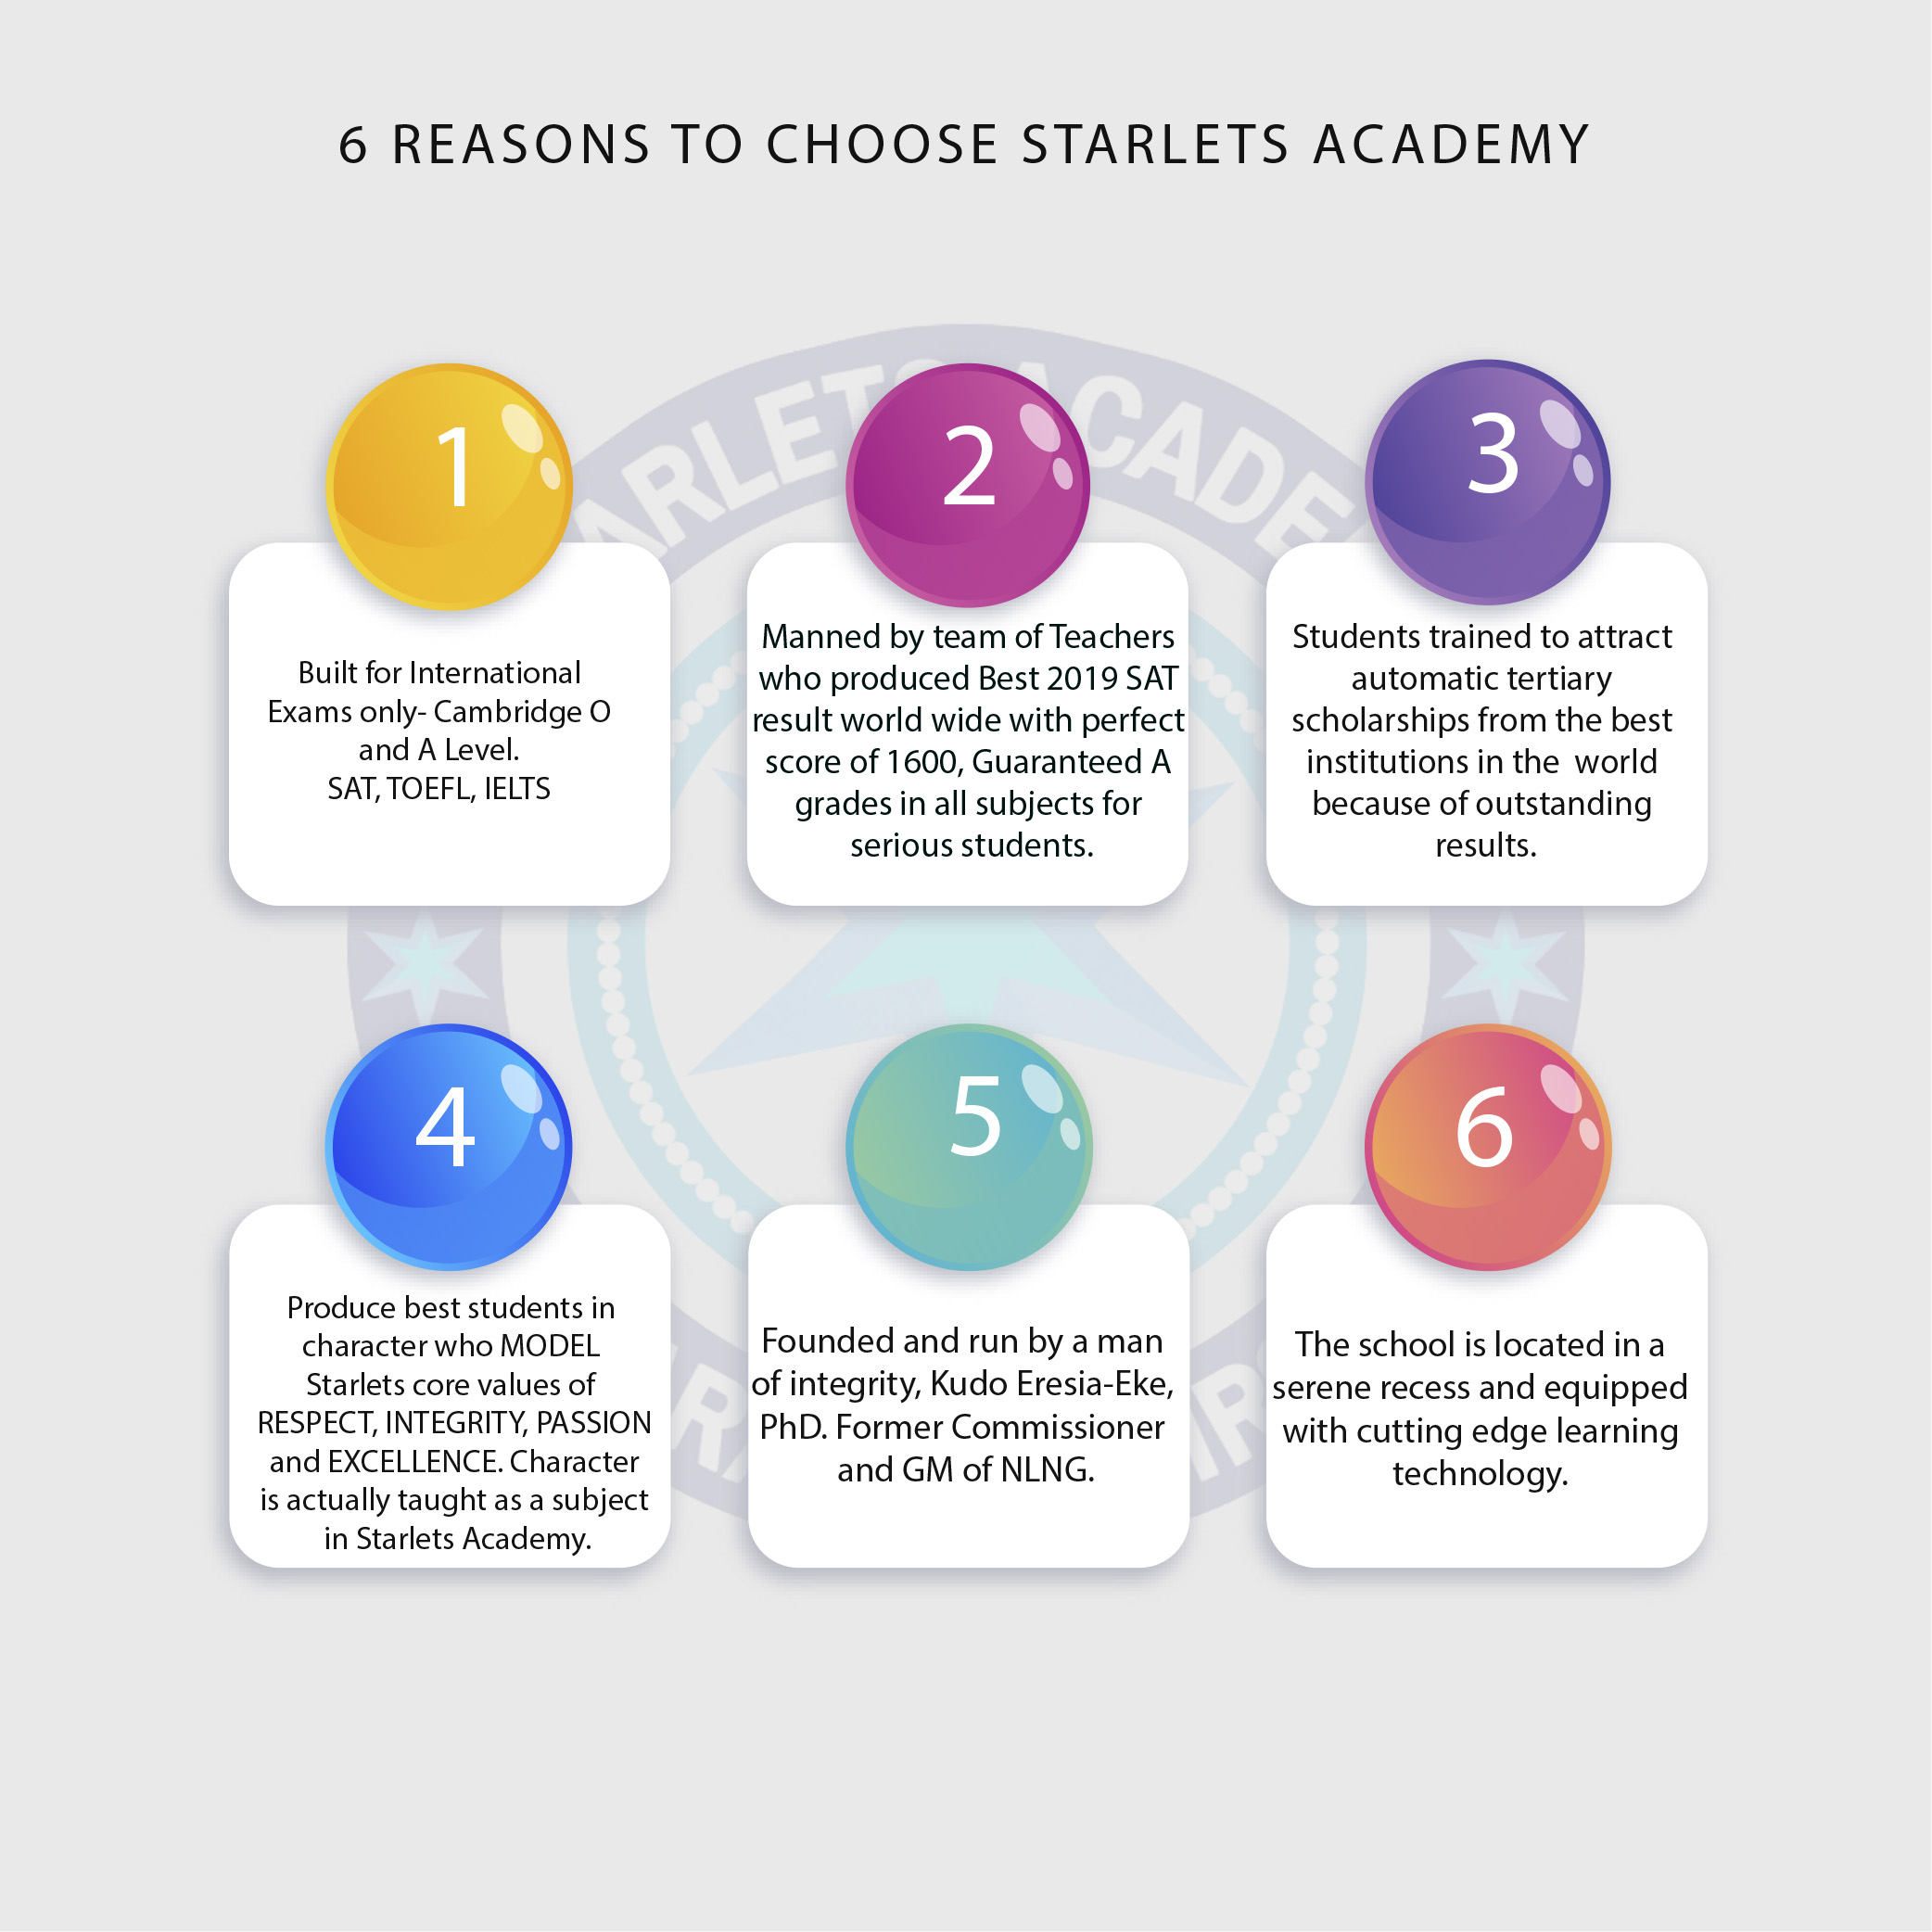 6 REASONS to choose STARLETS ACADEMY